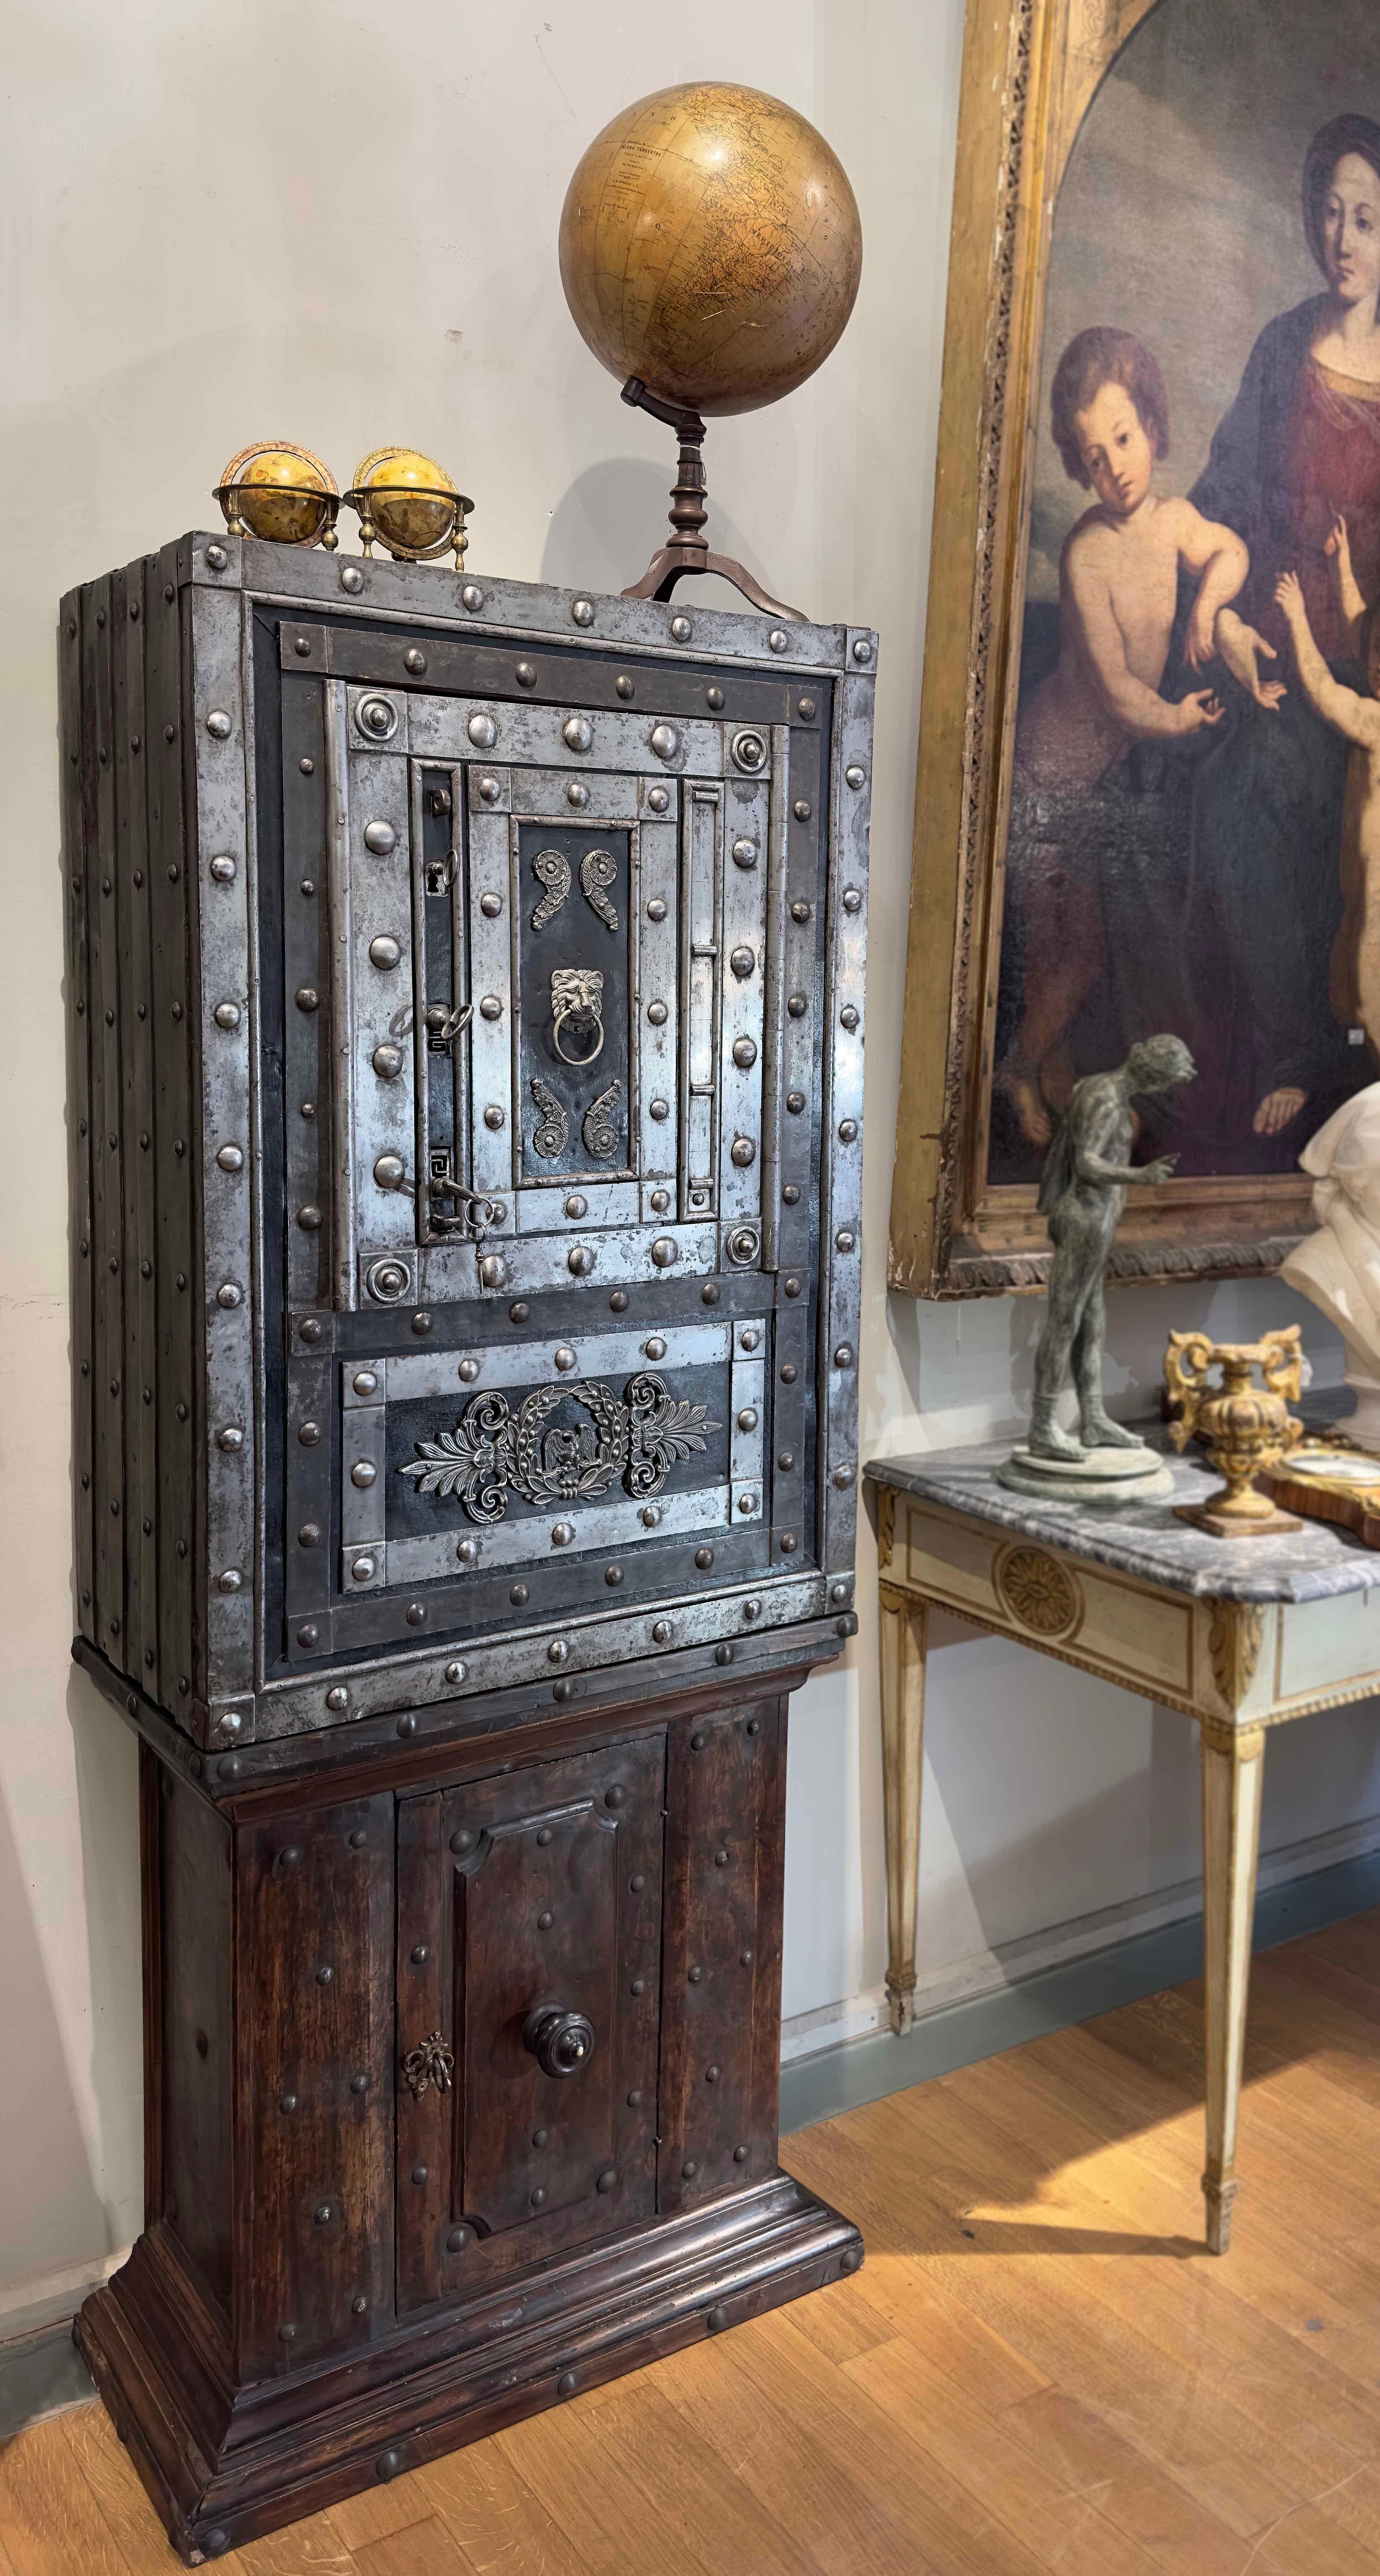 Beautiful iron safe from the late 18th century, mounted on an elegant Louis XIV small sideboard in solid walnut wood. This safe is particularly interesting for its construction with iron and steel plates fixed with bolted, rounded-head nails stuck